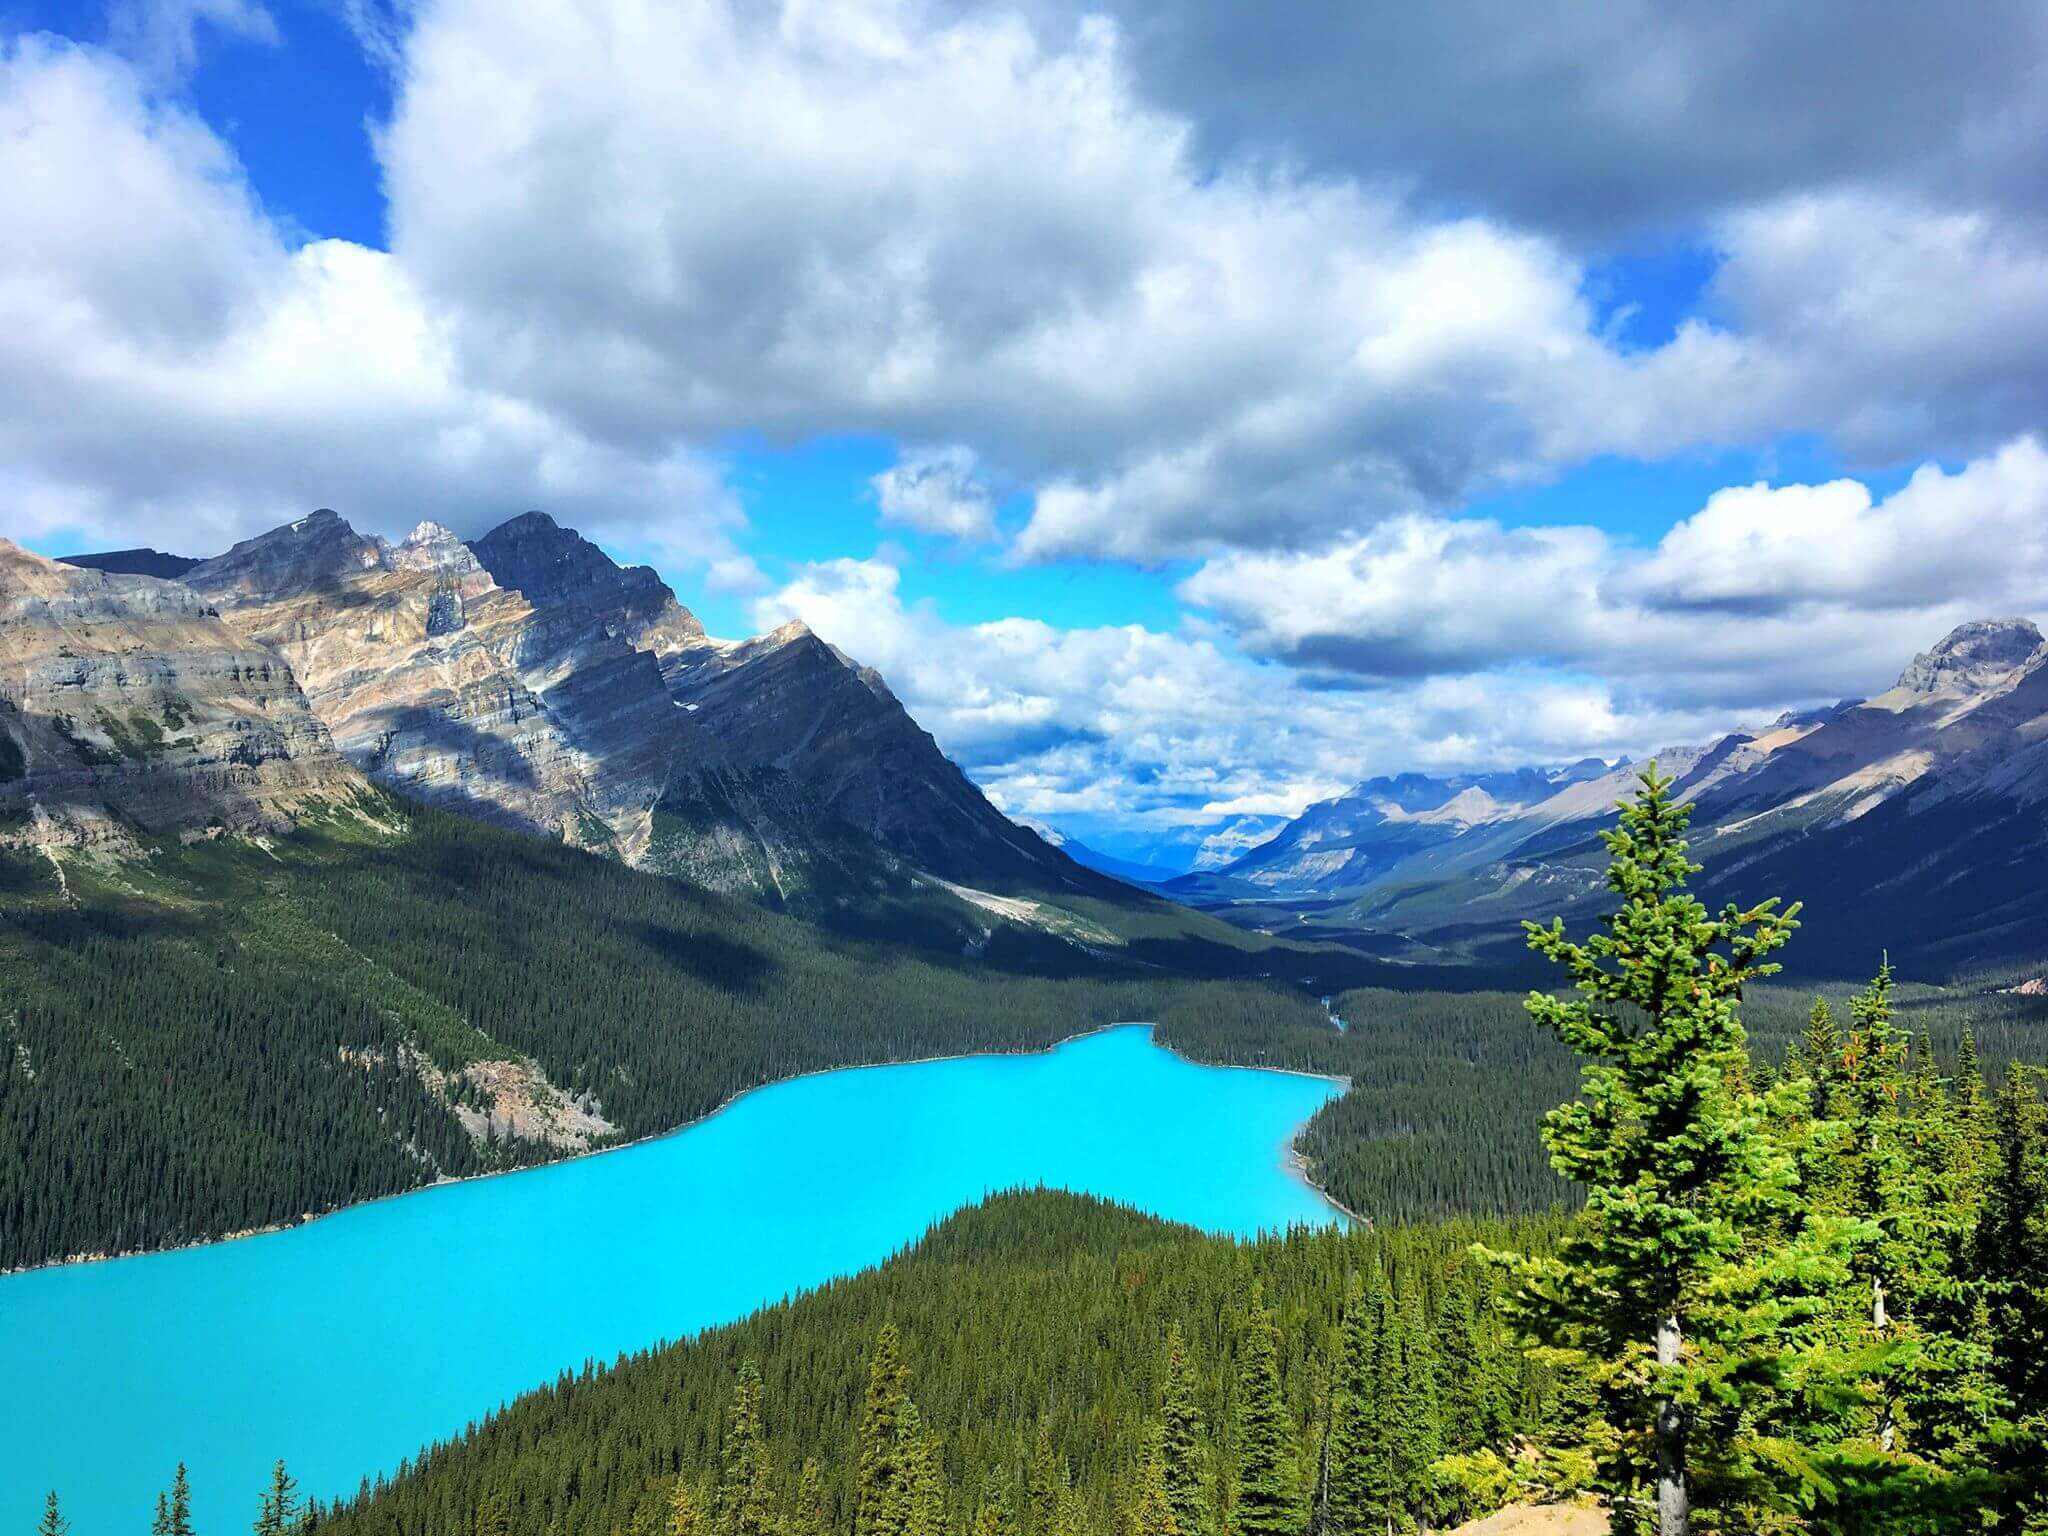 Peyto Lake is a glacier-fed lake in Banff National Park in the Canadian Rockies. During the summer, rock particles flow into the lake from a nearby glacier. The lightweight rock particles float suspended in the water for a long time, giving the lake its spectacular turquoise color.